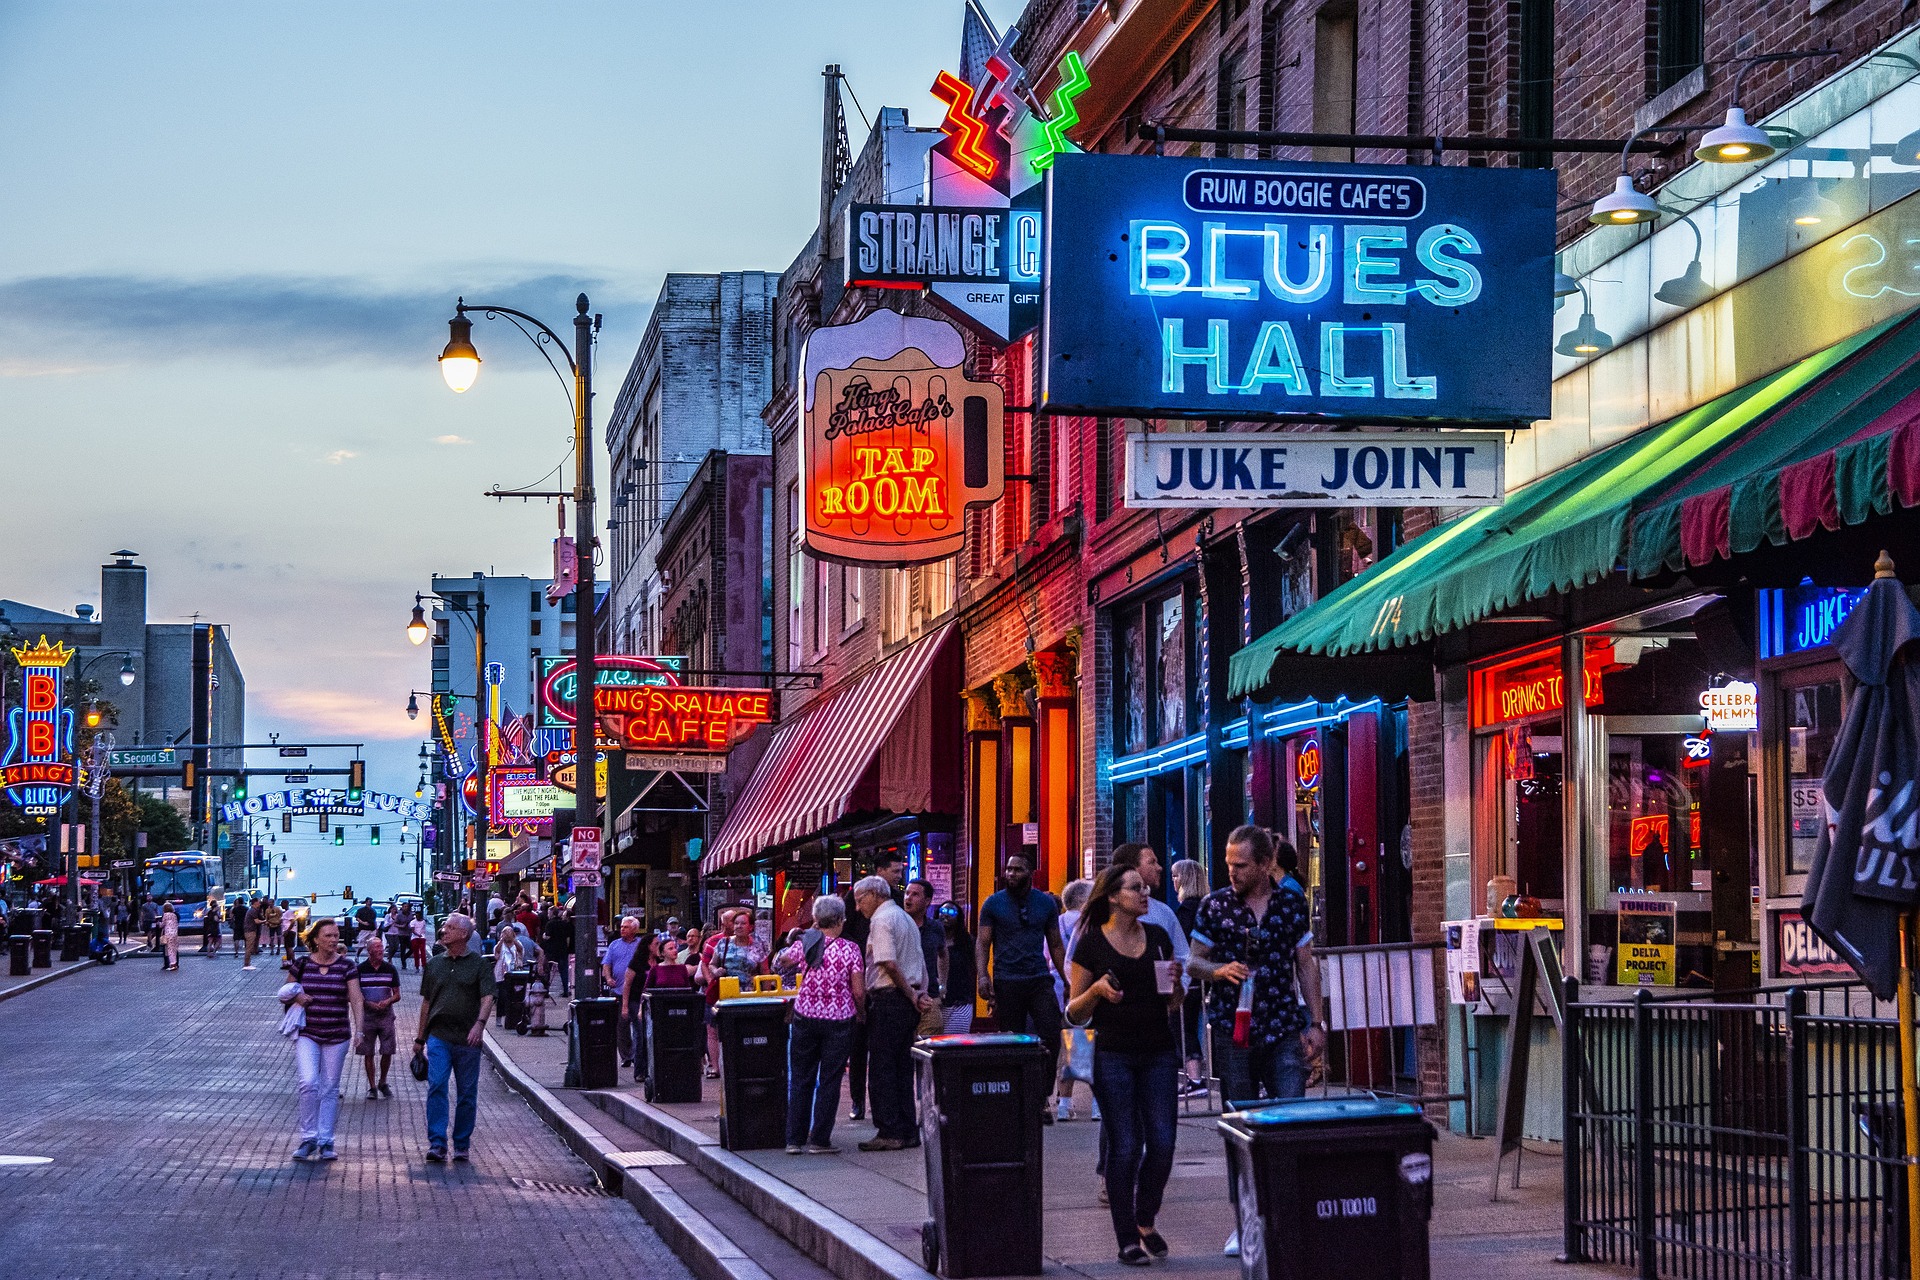 Beale Street - one of the best neighborhoods for live music